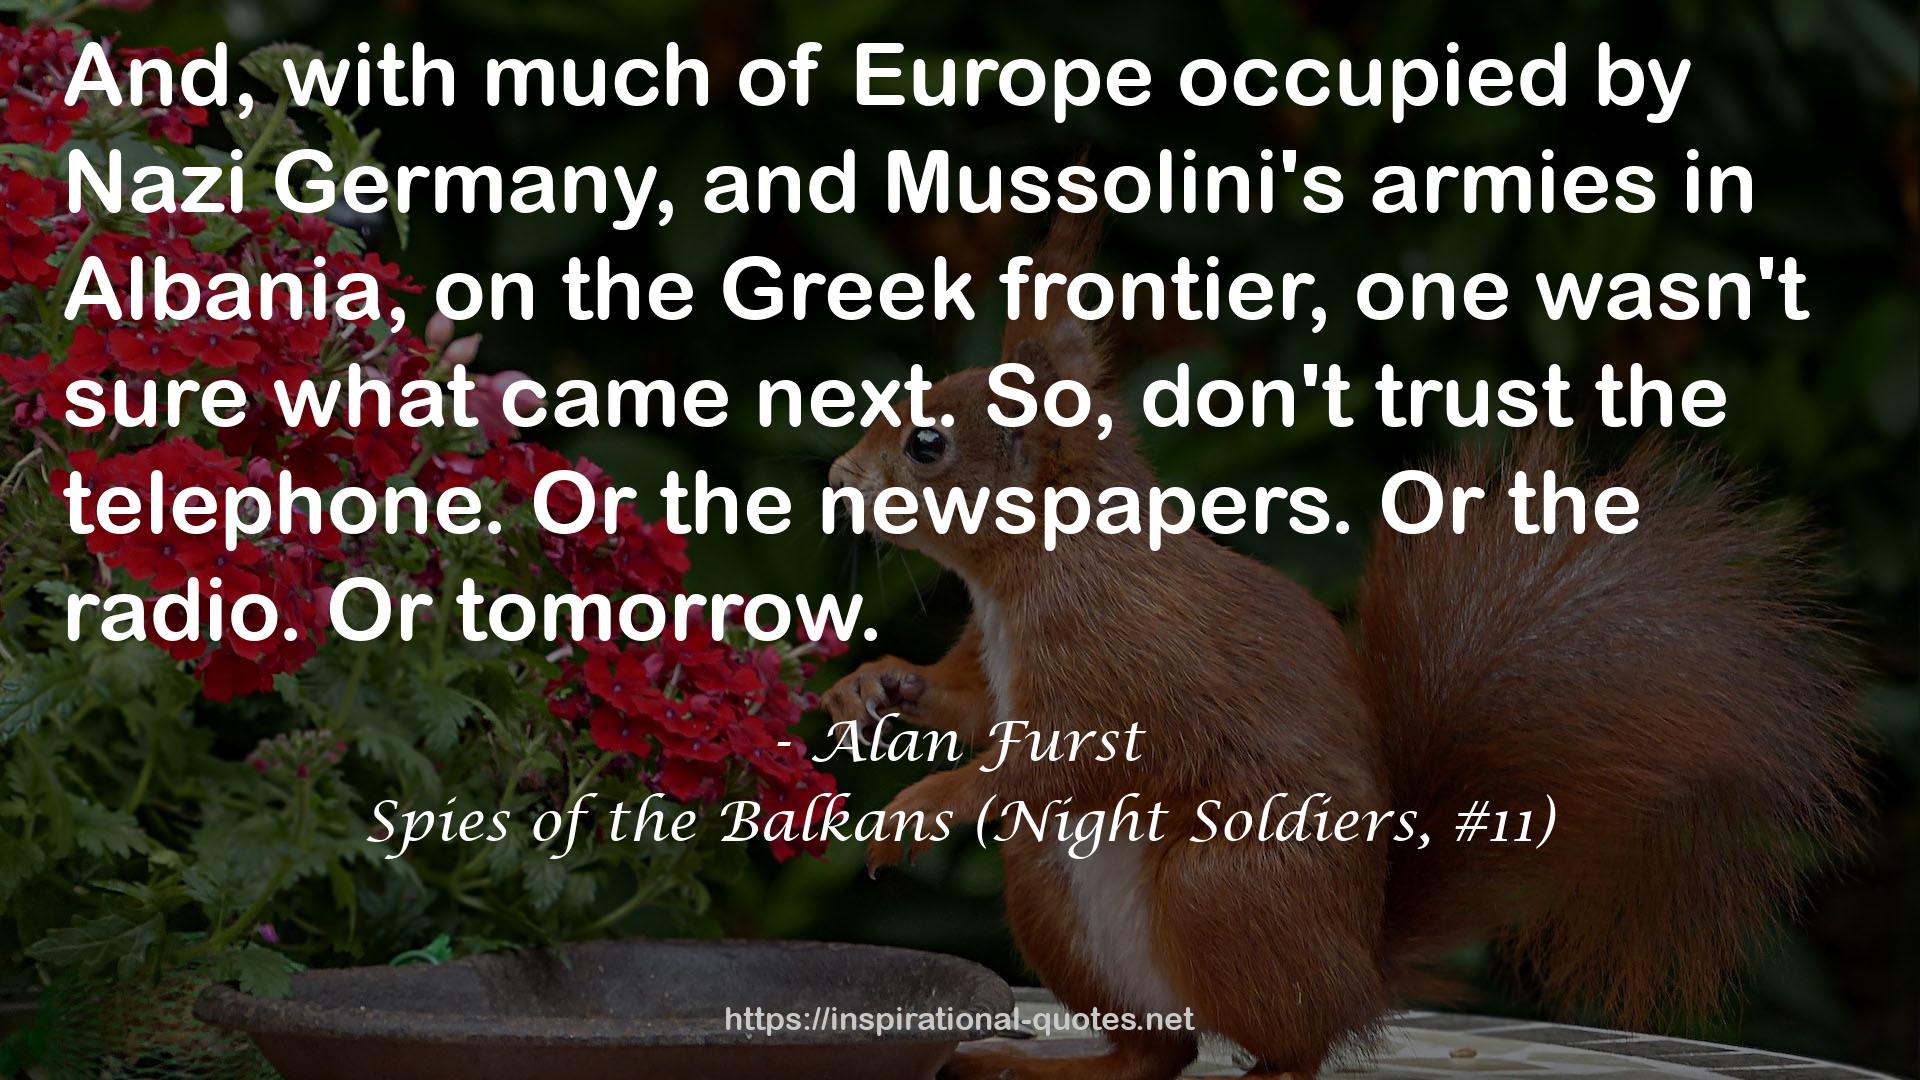 Spies of the Balkans (Night Soldiers, #11) QUOTES